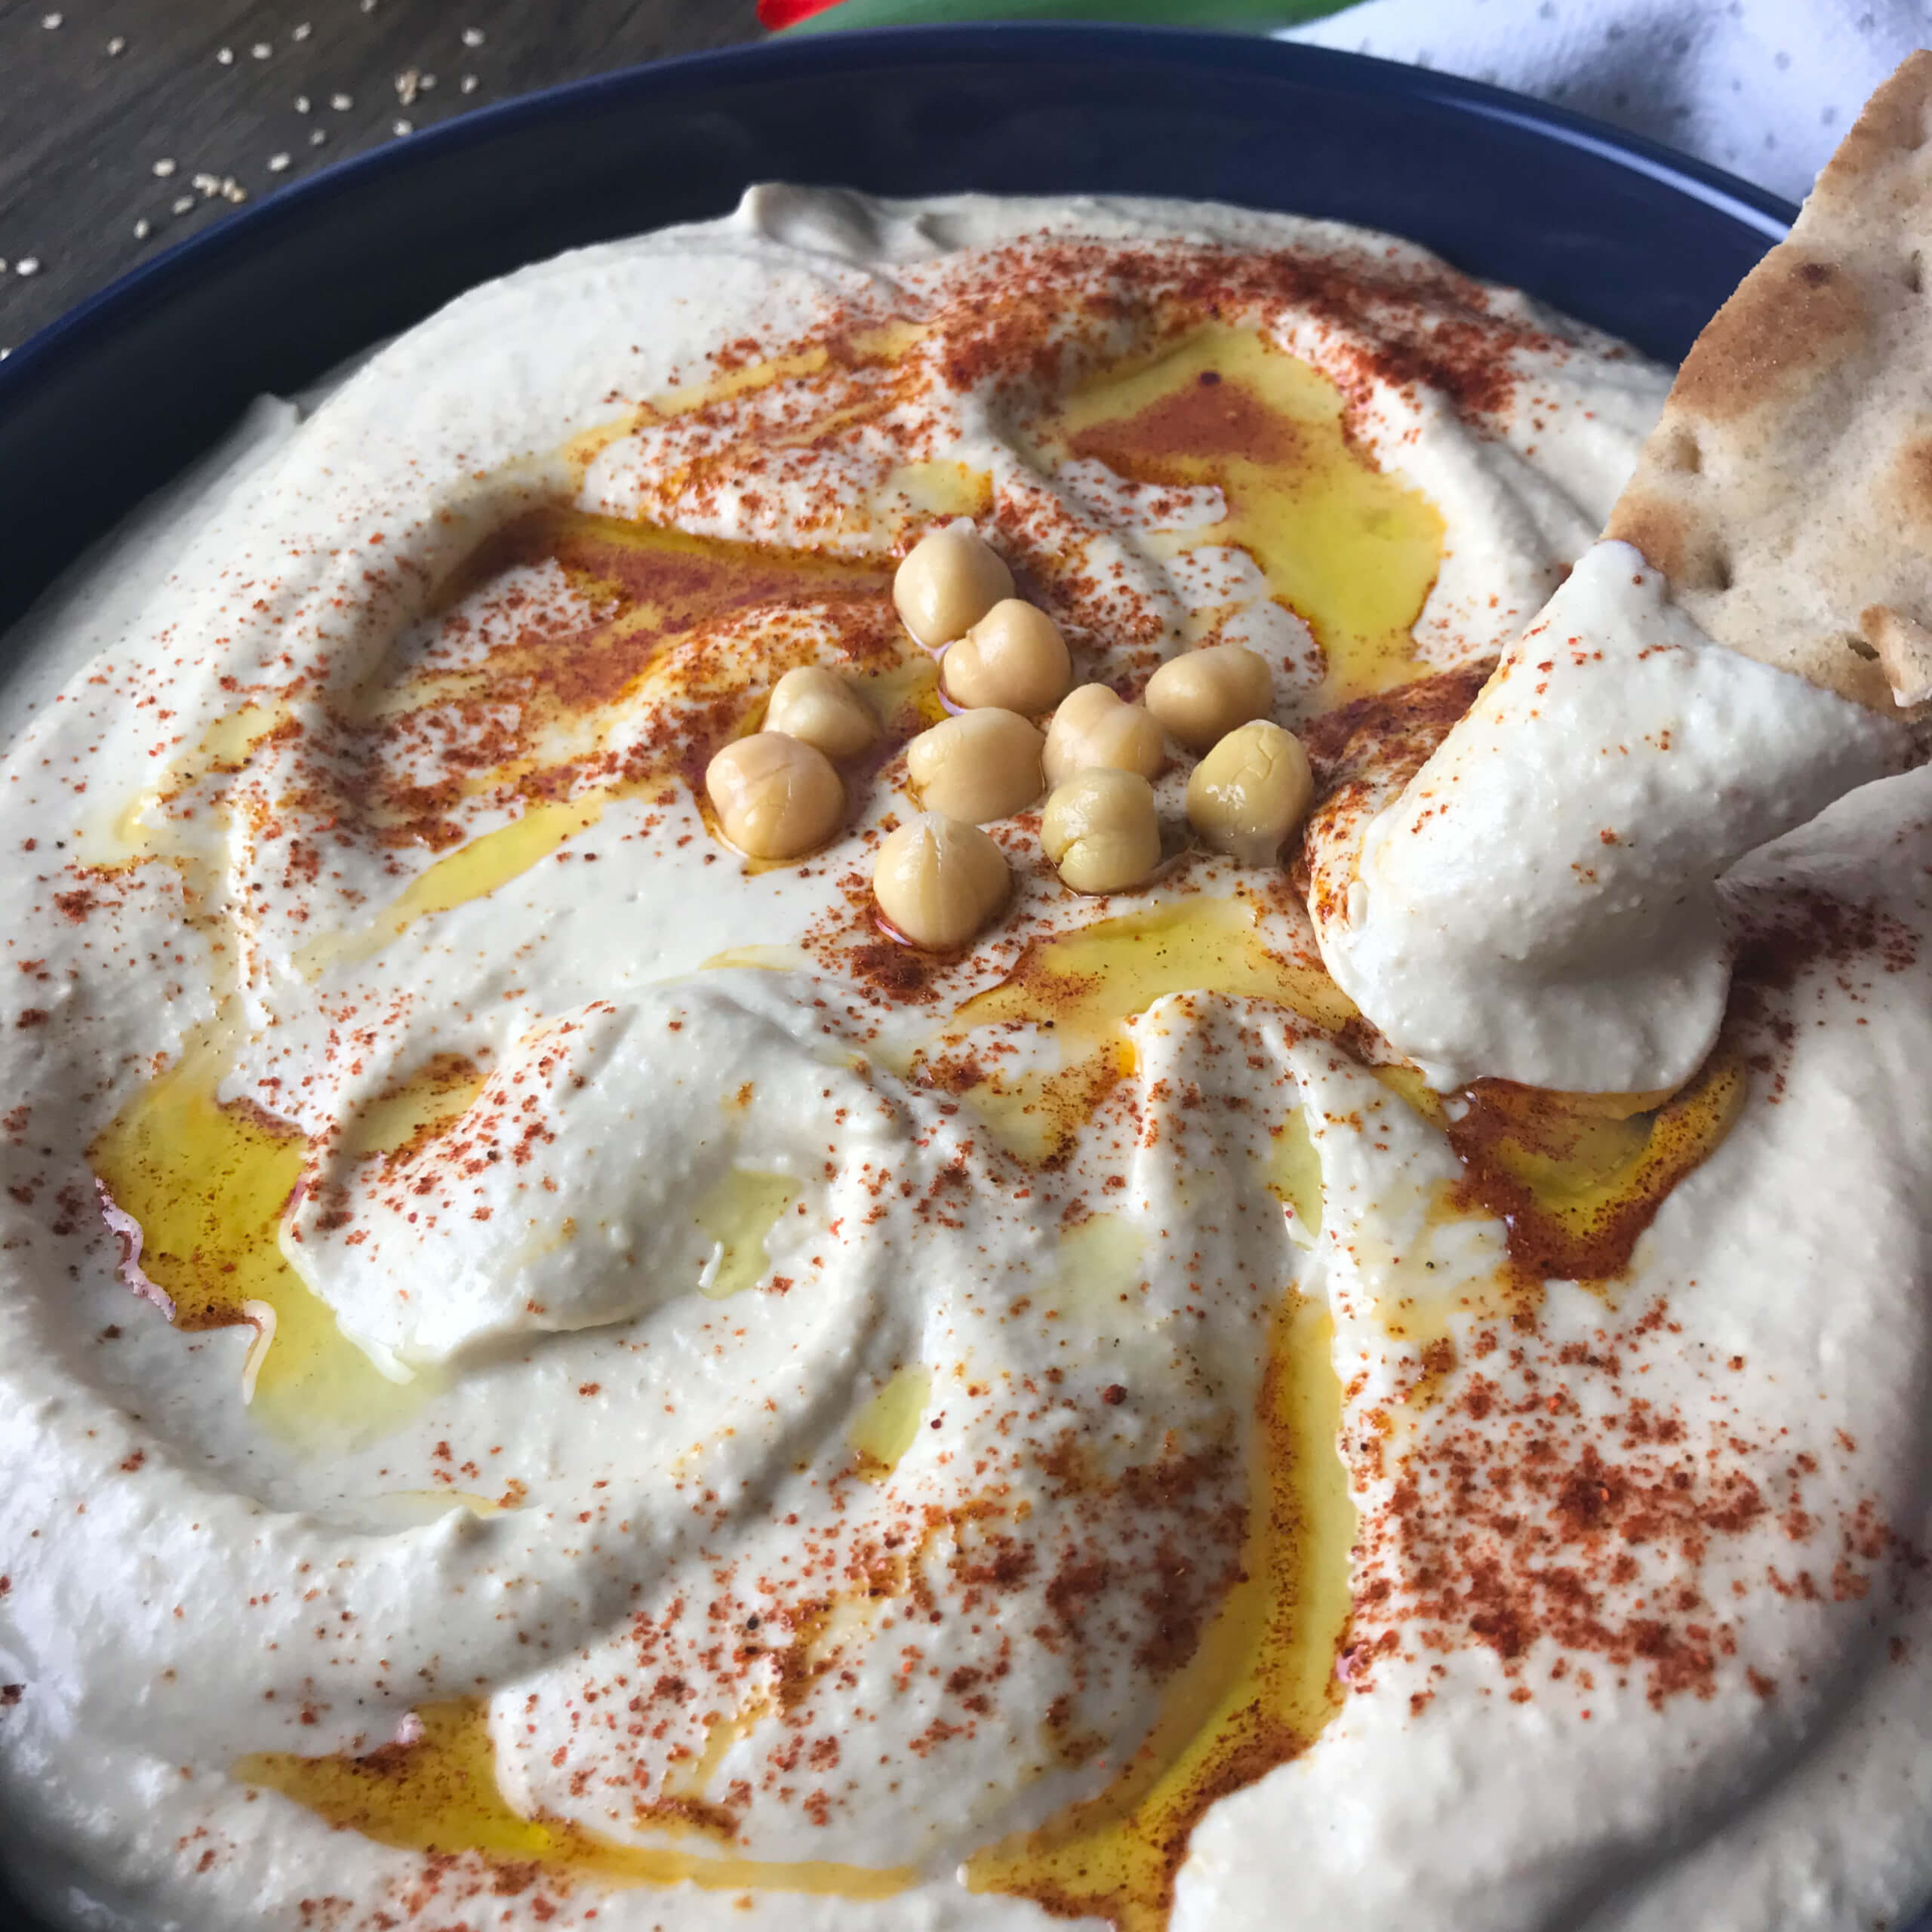 Classic Hummus | My Curated Tastes